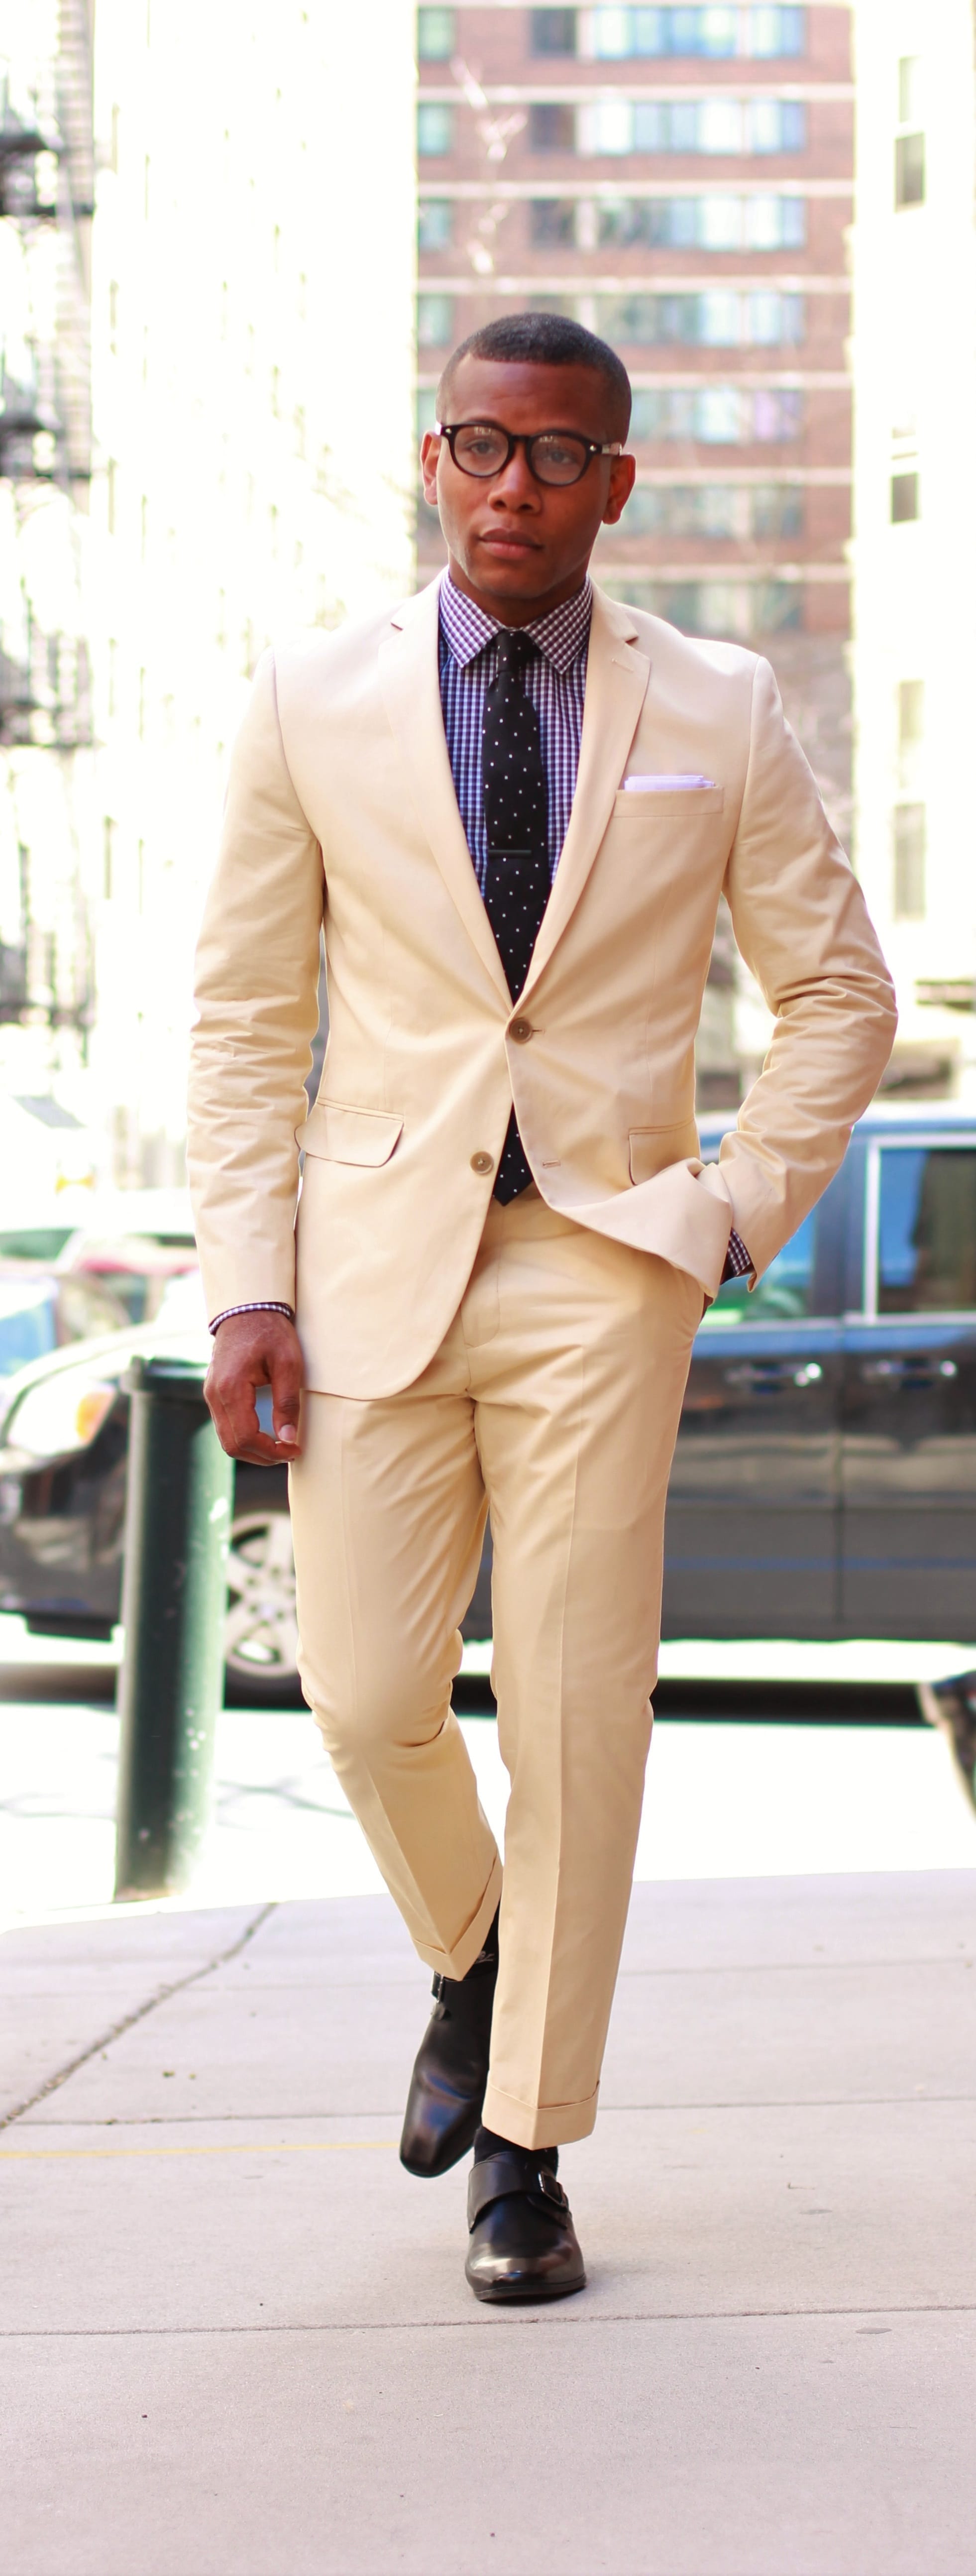 Stylish Khaki Suit Outfit Ideas For Guys